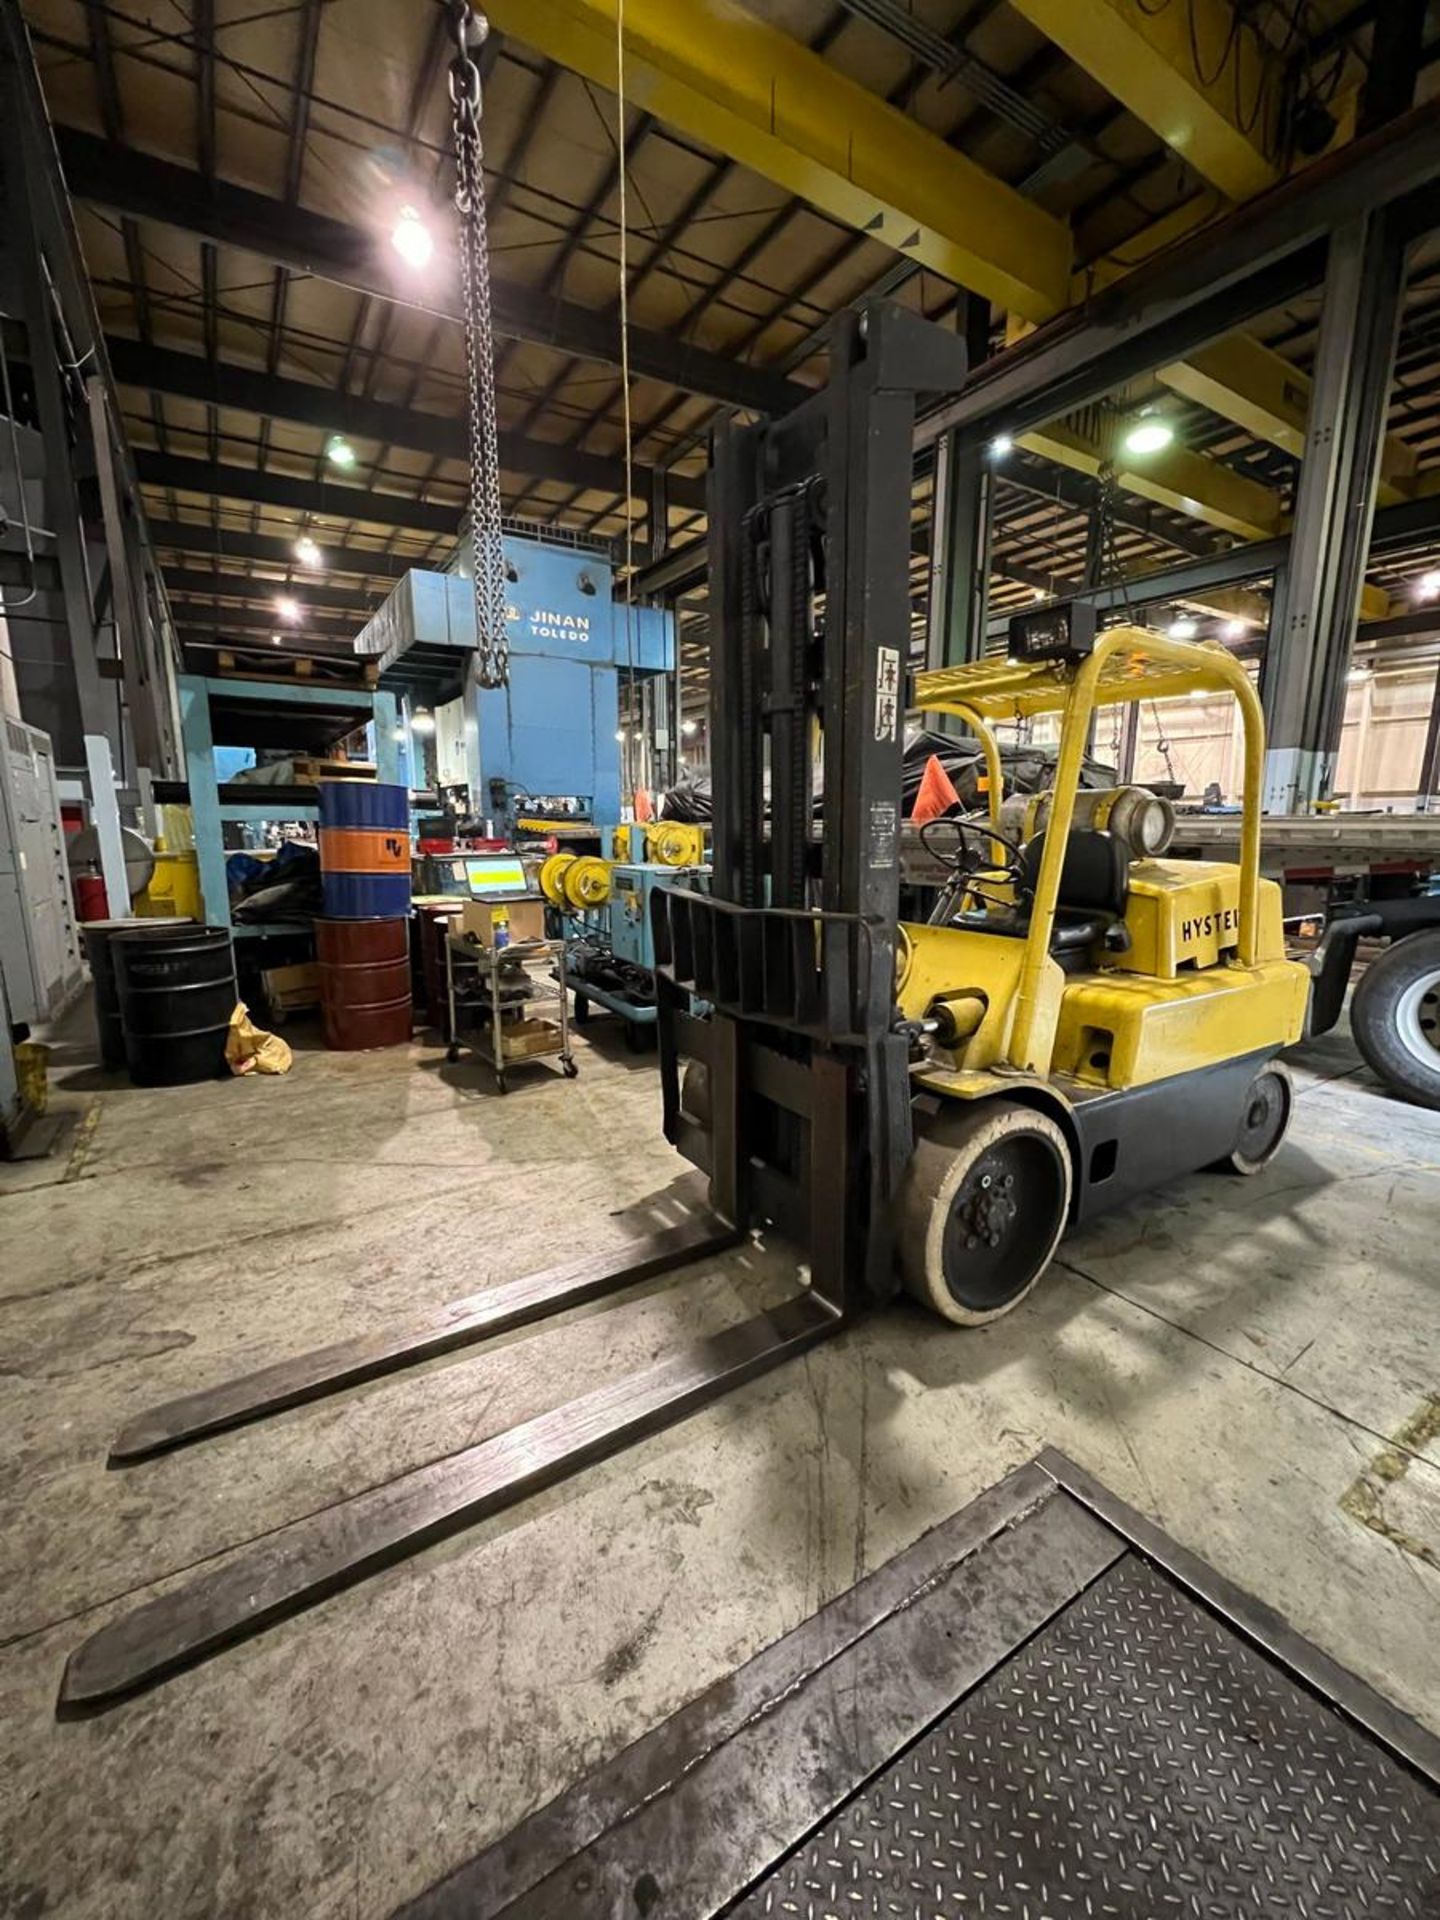 Hyster S150A 15,000 Lb Capacity LP Type Forklift - Image 4 of 8